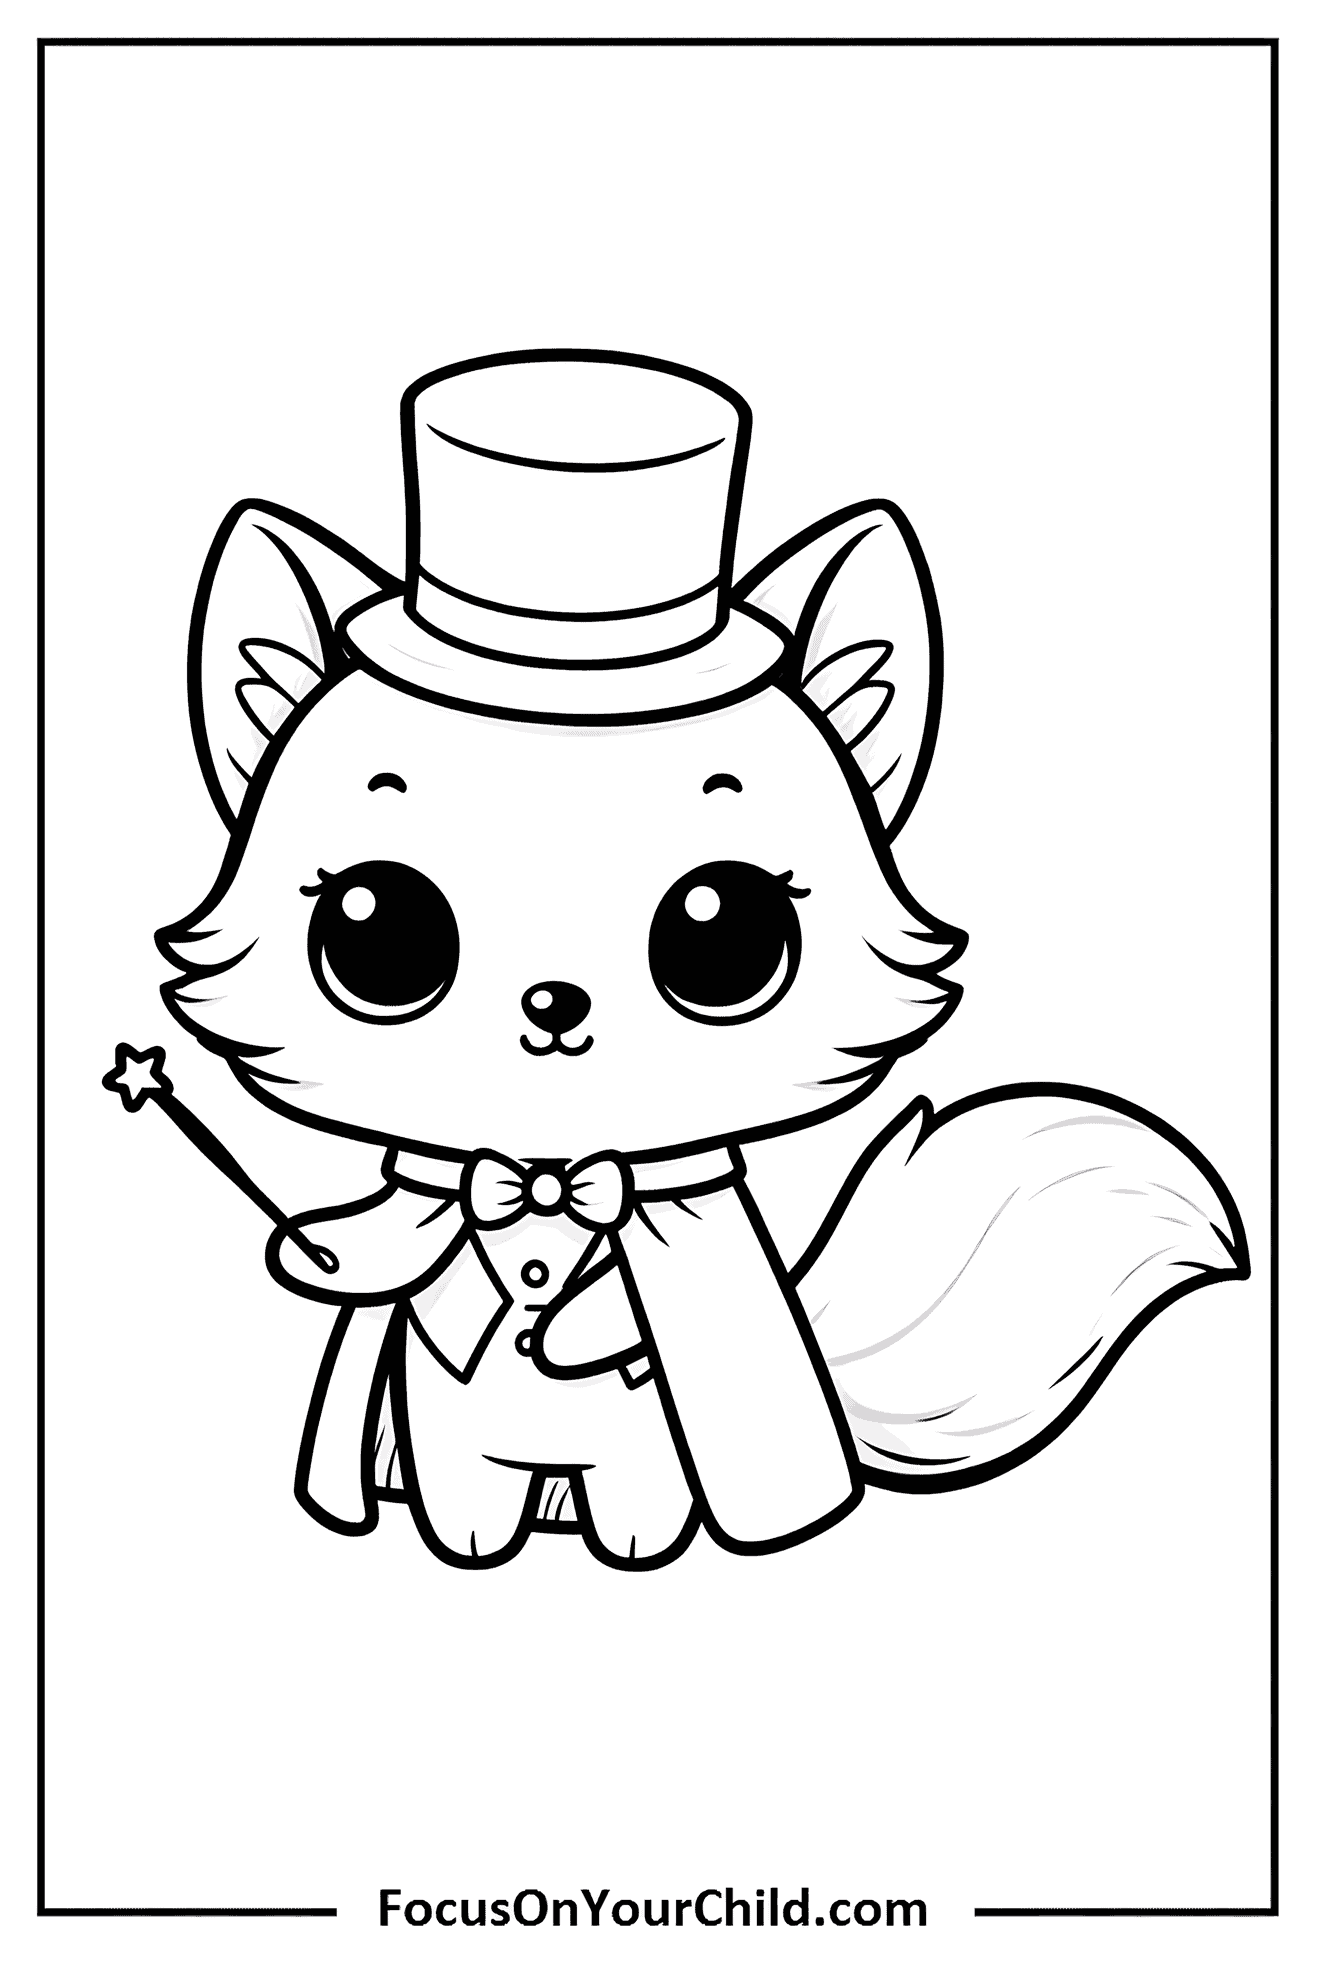 Adorable cartoon fox magician with wand, cape, and hat, perfect for childrens content.